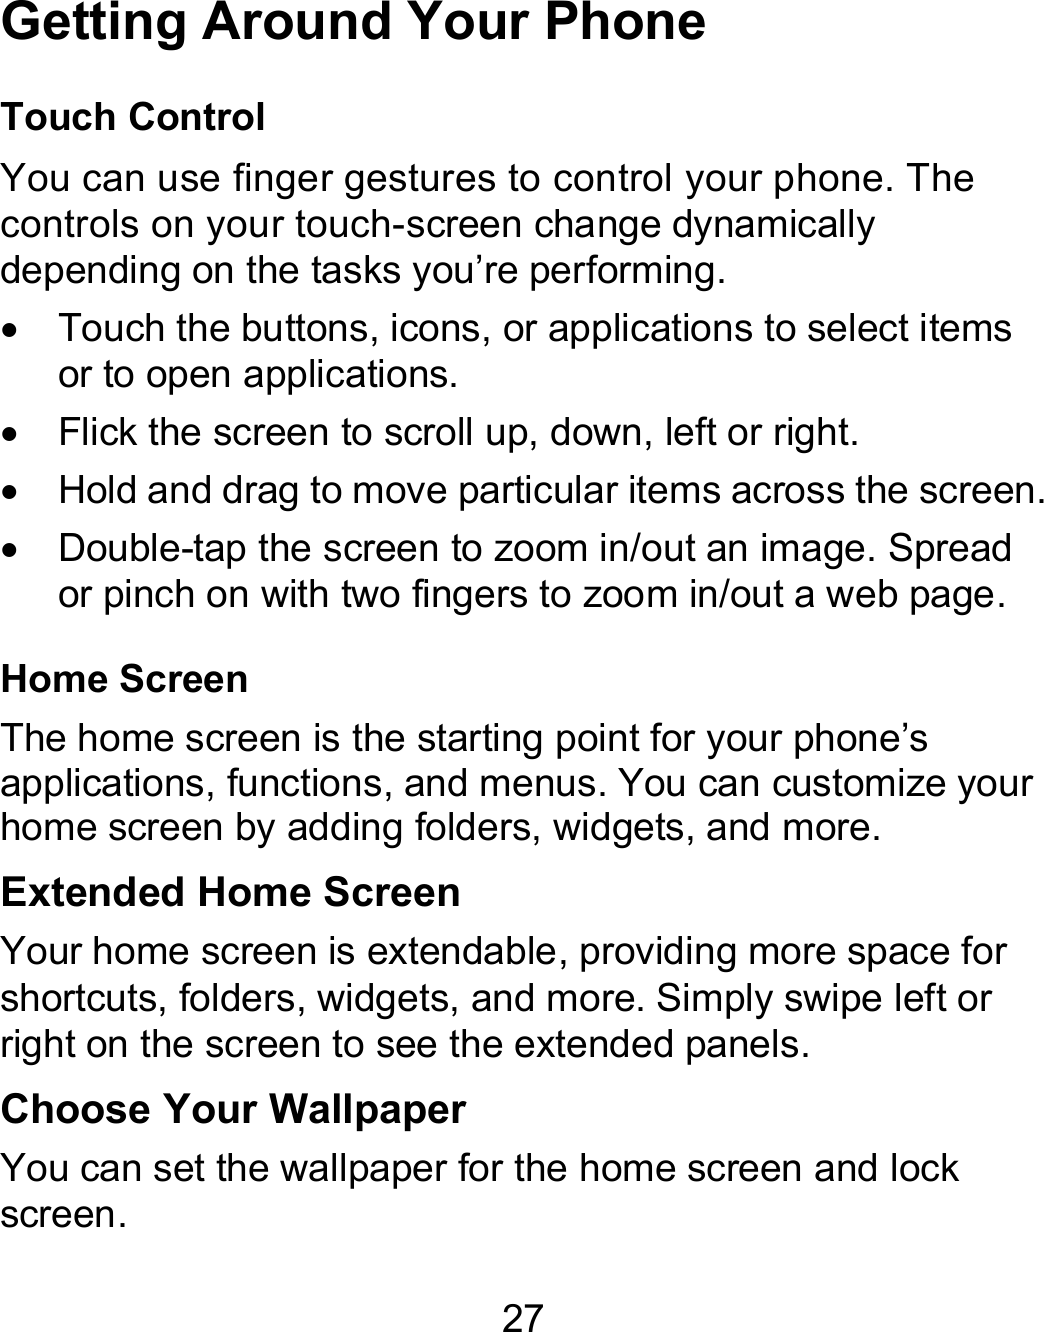 27 Getting Around Your Phone Touch Control You can use finger gestures to control your phone. The controls on your touch-screen change dynamically depending on the tasks you’re performing.   Touch the buttons, icons, or applications to select items or to open applications.   Flick the screen to scroll up, down, left or right.   Hold and drag to move particular items across the screen.   Double-tap the screen to zoom in/out an image. Spread or pinch on with two fingers to zoom in/out a web page. Home Screen The home screen is the starting point for your phone’s applications, functions, and menus. You can customize your home screen by adding folders, widgets, and more.   Extended Home Screen Your home screen is extendable, providing more space for shortcuts, folders, widgets, and more. Simply swipe left or right on the screen to see the extended panels.   Choose Your Wallpaper You can set the wallpaper for the home screen and lock screen. 